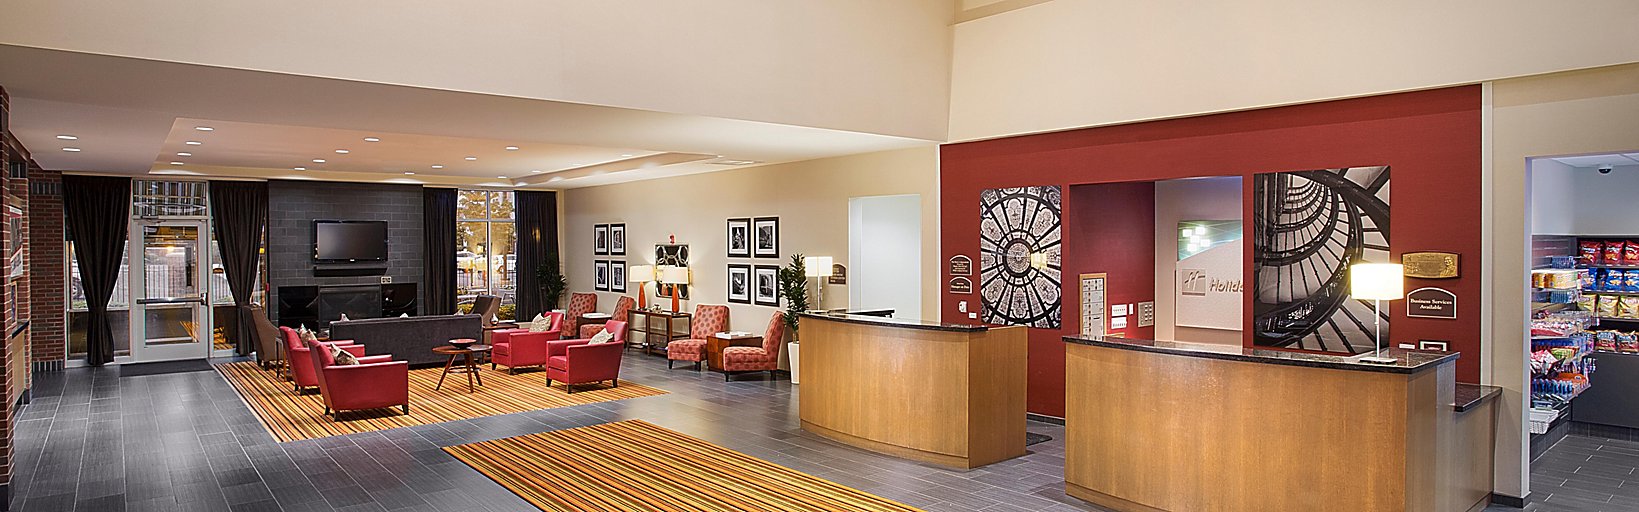 Hotels Near Chicago Midway Airport Holiday Inn Chicago